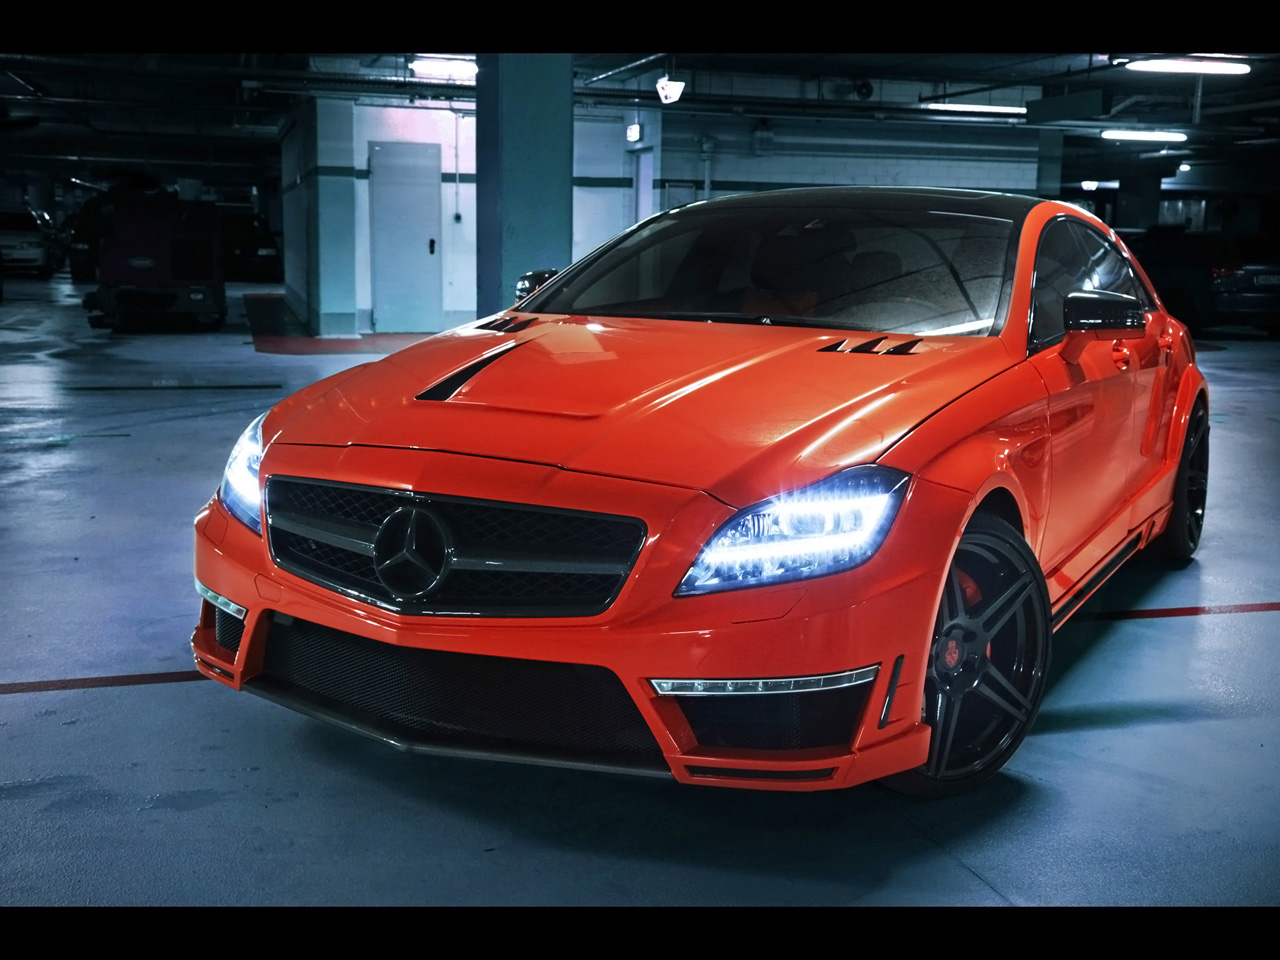 german-special-customs-mercedes-benz-cls63-amg-stealth